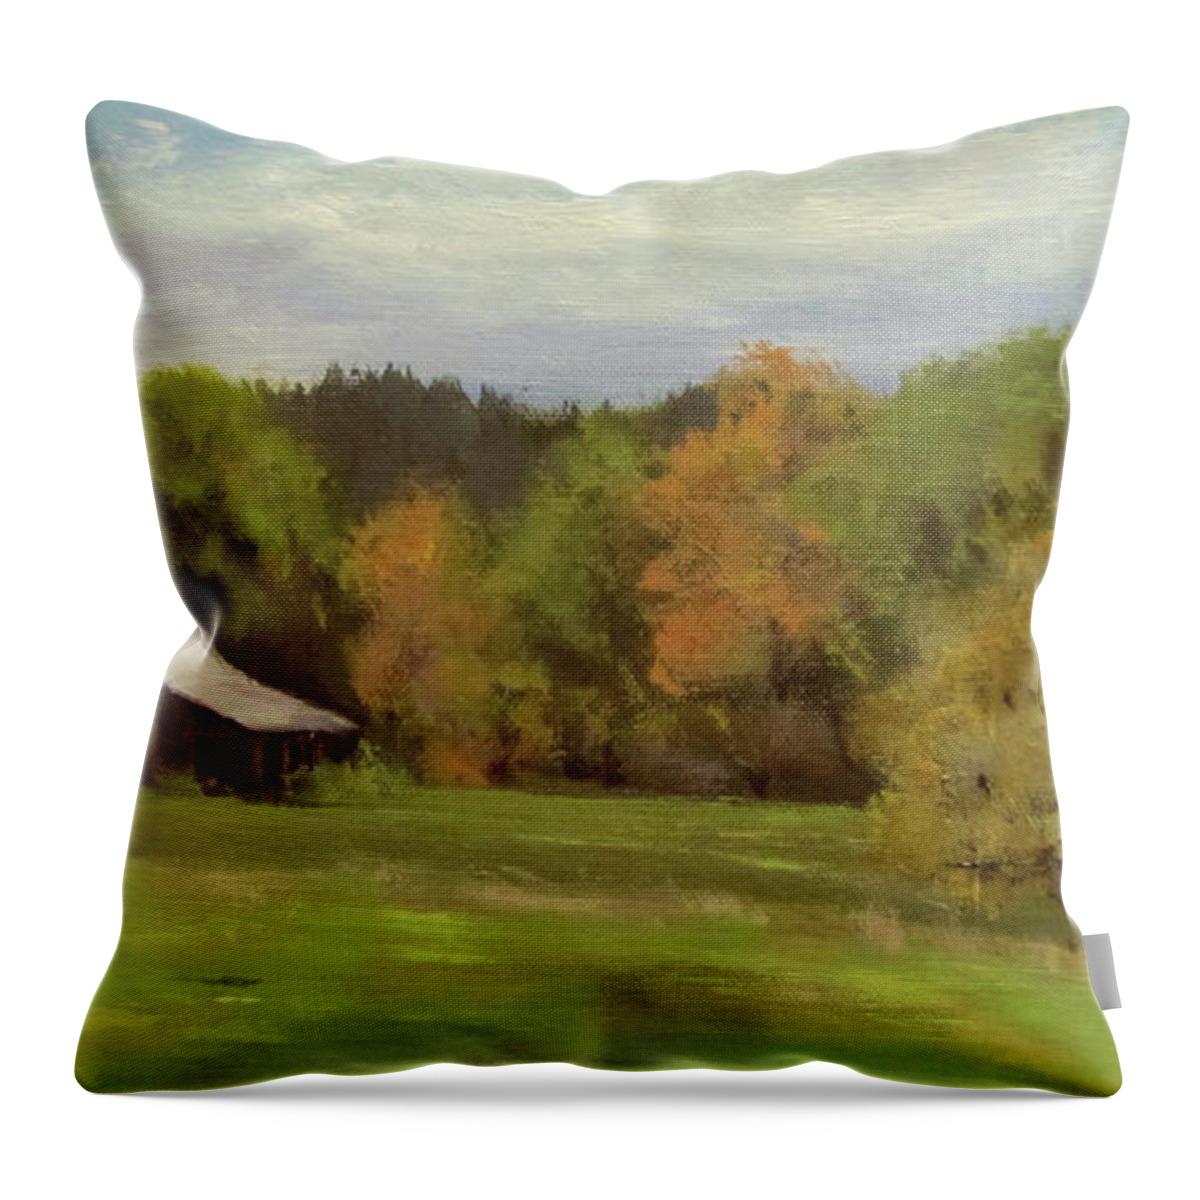 Barn Throw Pillow featuring the painting Mildred Kanipe Equestrian Park by Karen Ilari